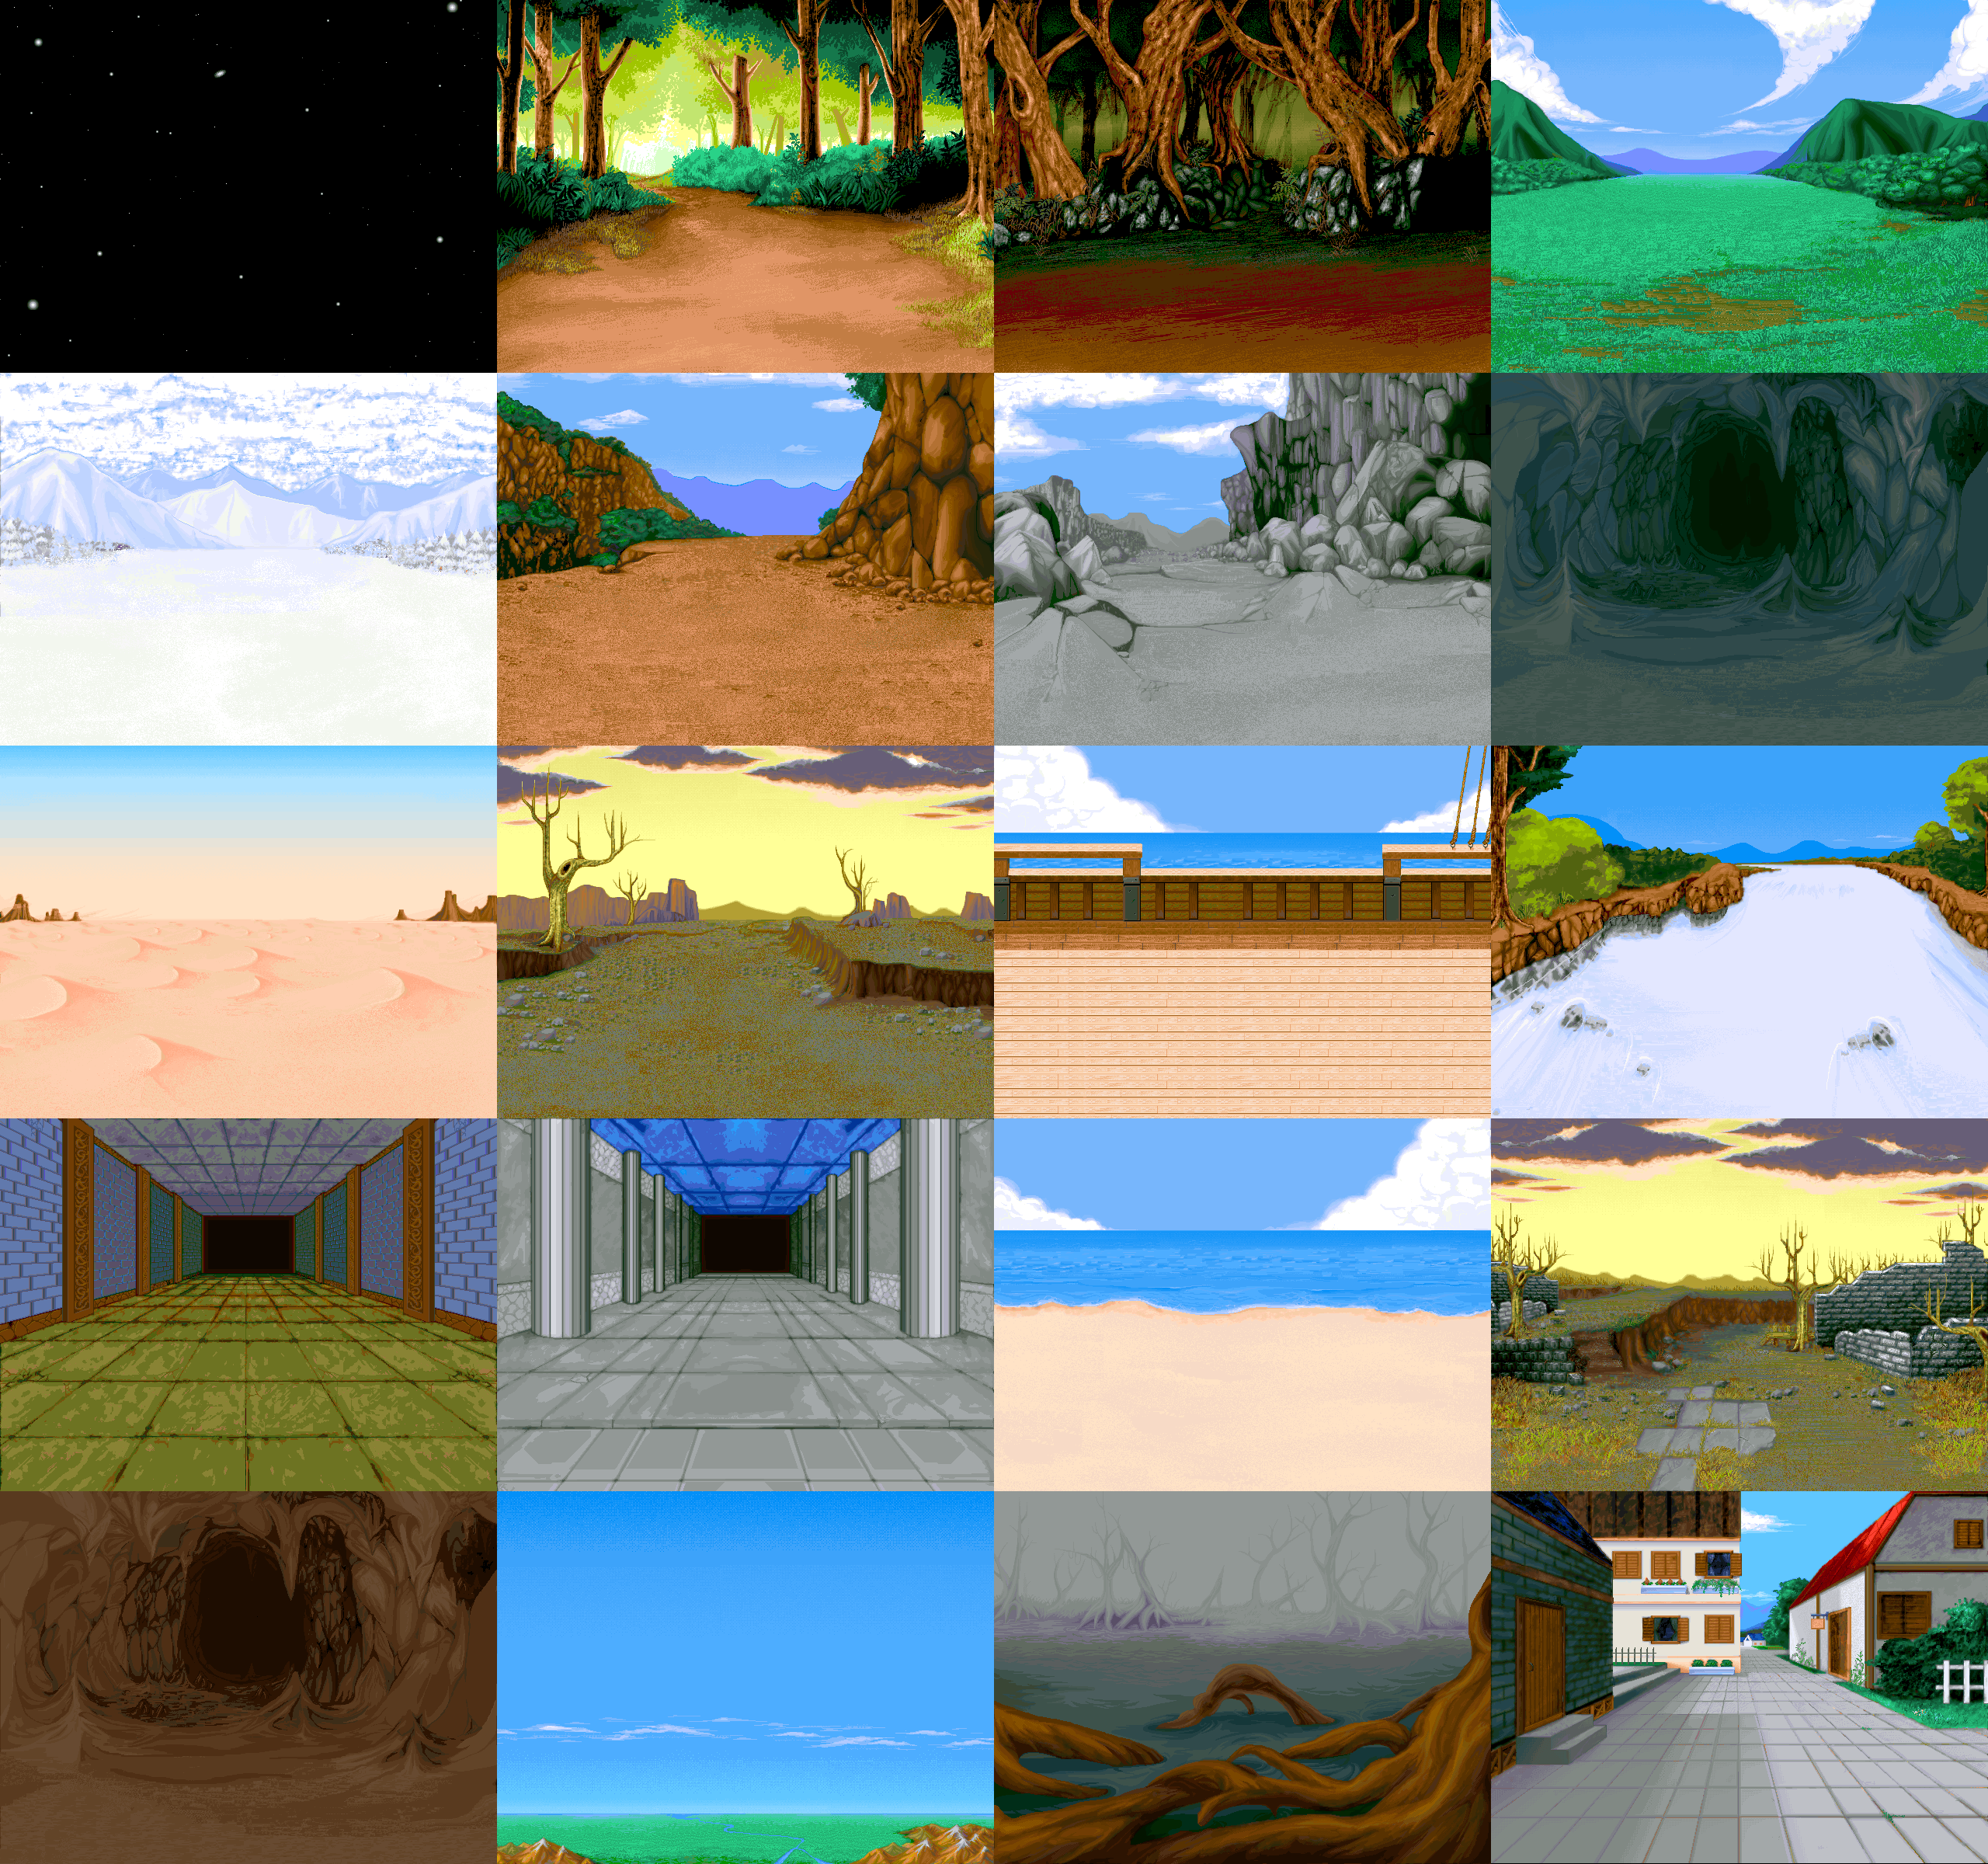 rpg maker parallax backgrounds resize